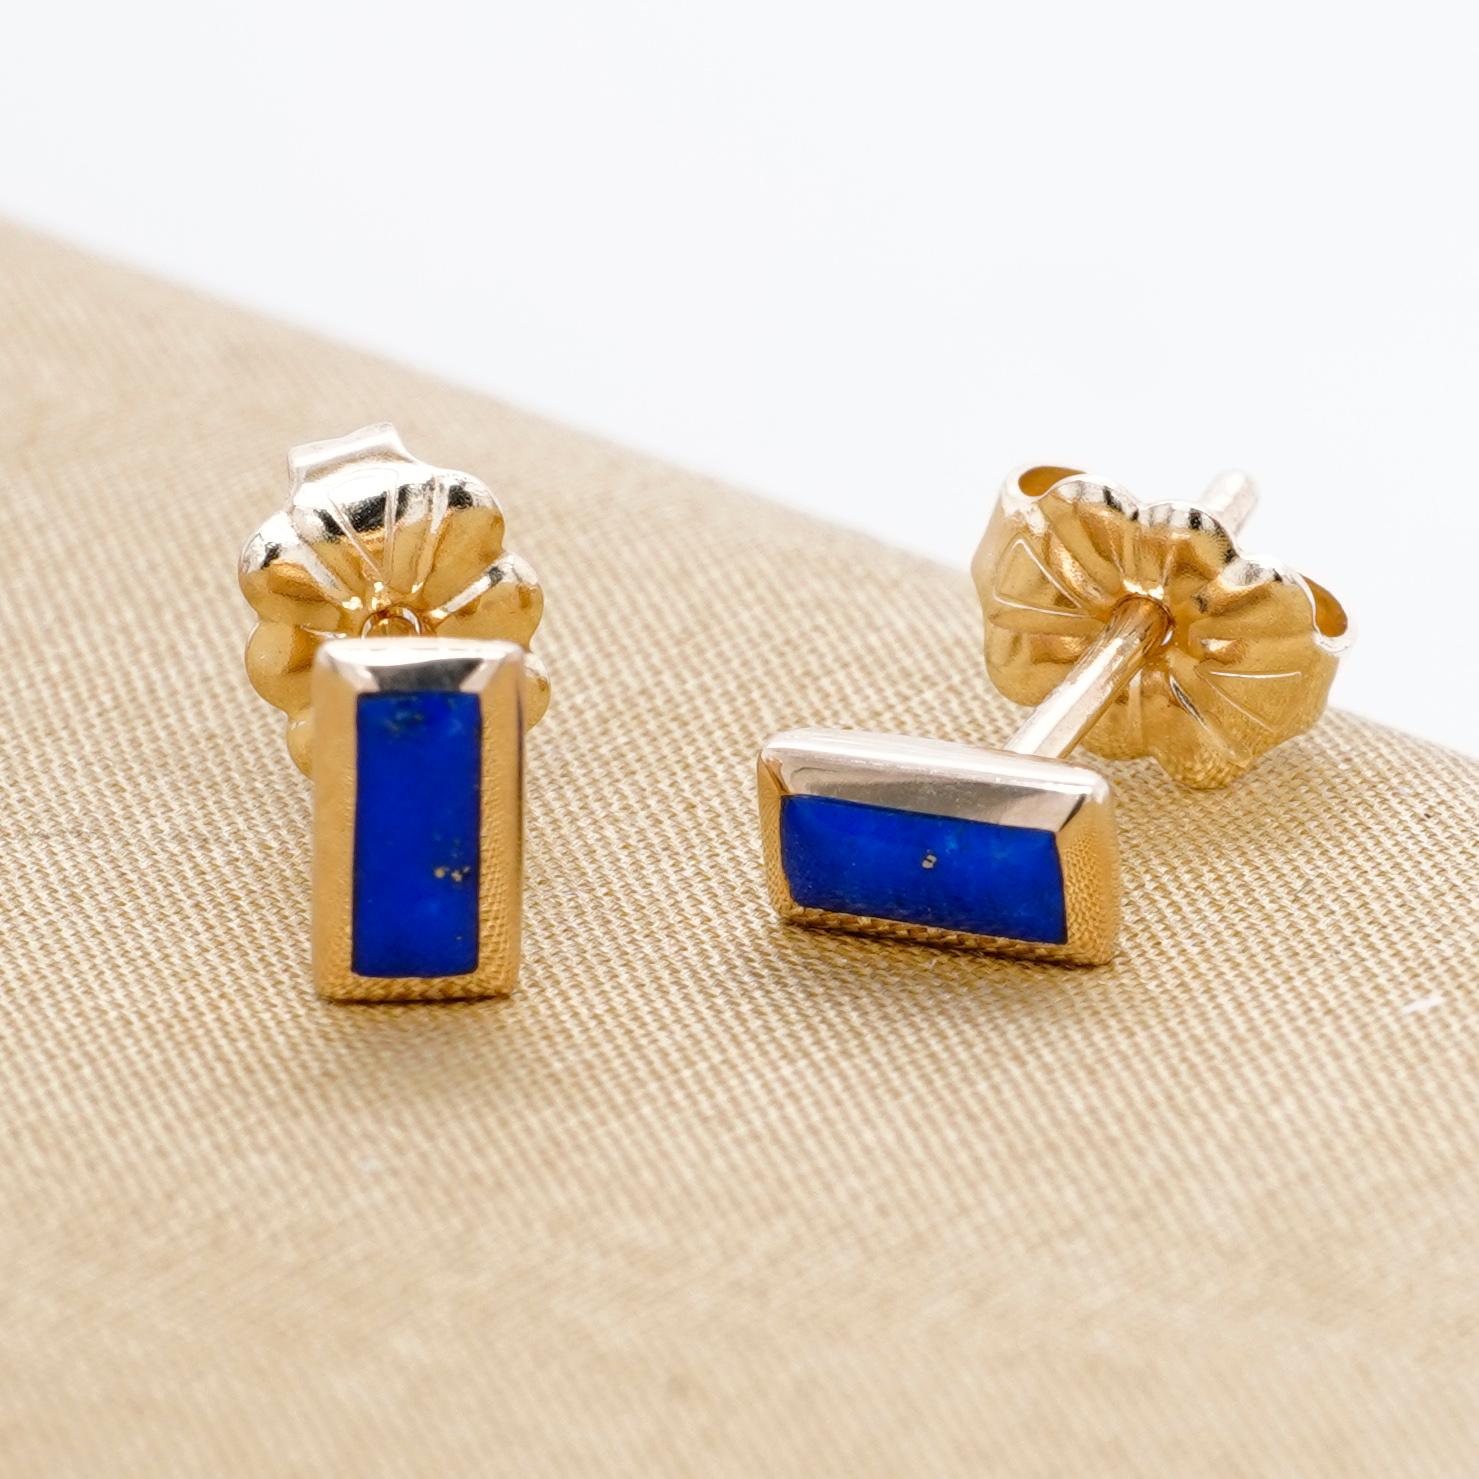 Little, Rectangular, Lapis Lazui Inlay Post Earrings 14kt Yellow Gold, by Kabana In New Condition For Sale In Bozeman, MT